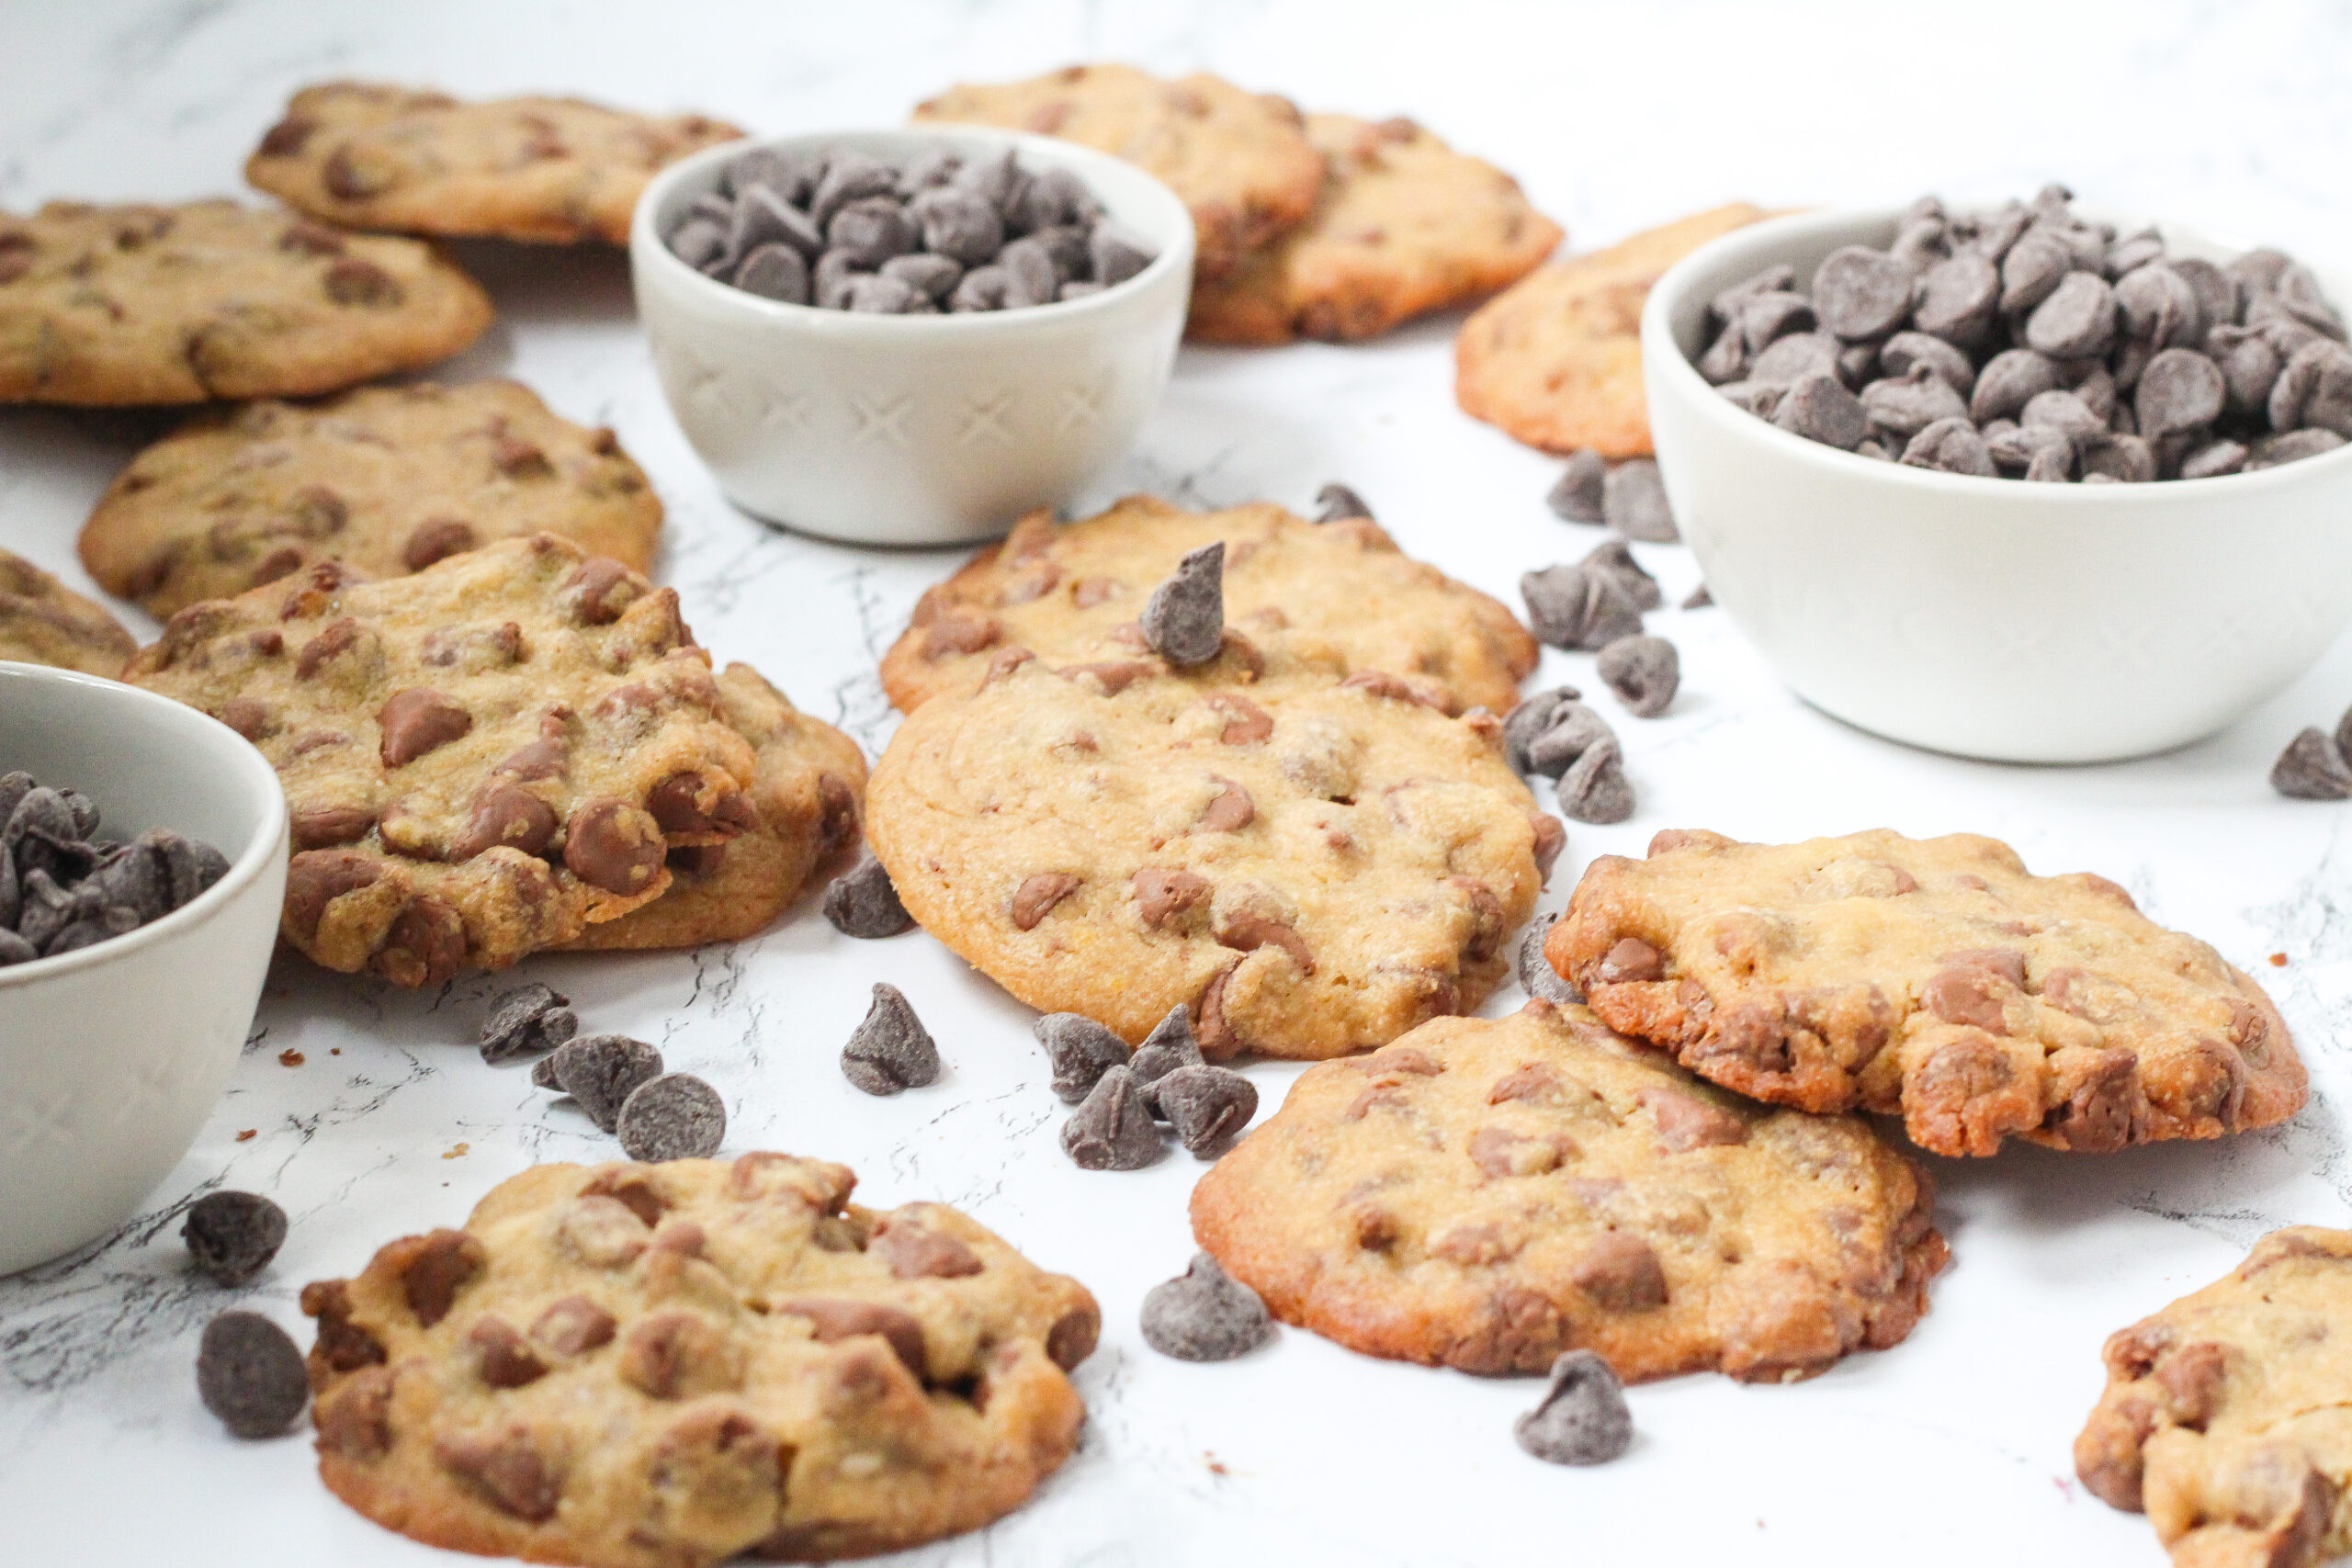 Angled view of a lot of cookies with three small bowls of chocolate chips and loose chocolate chips spread around throughout the cookies